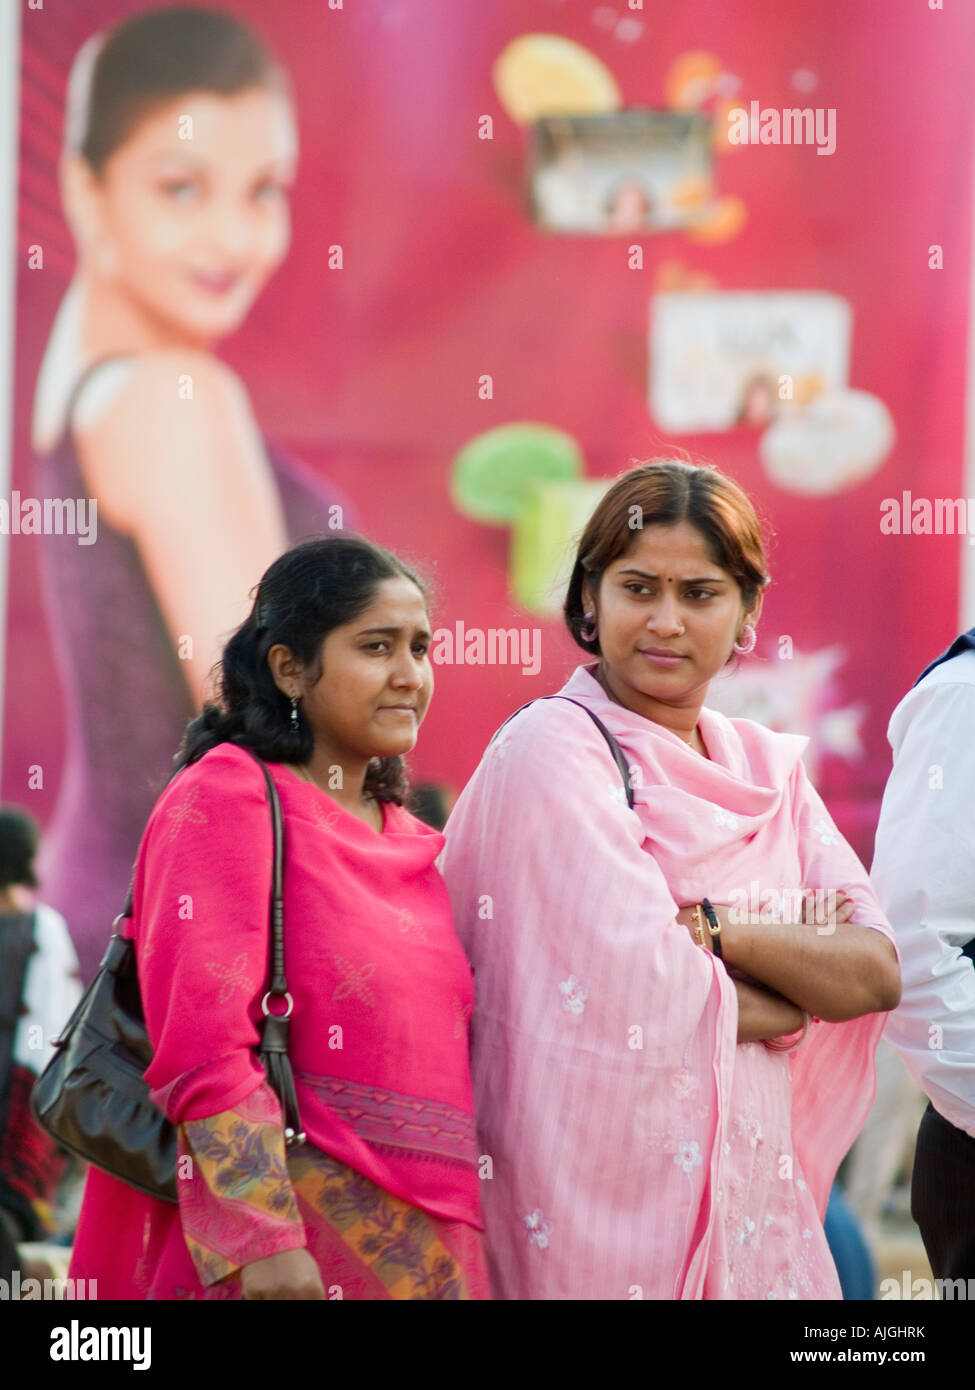 Consumers pass consumer brand icons at a trade fair Stock Photo